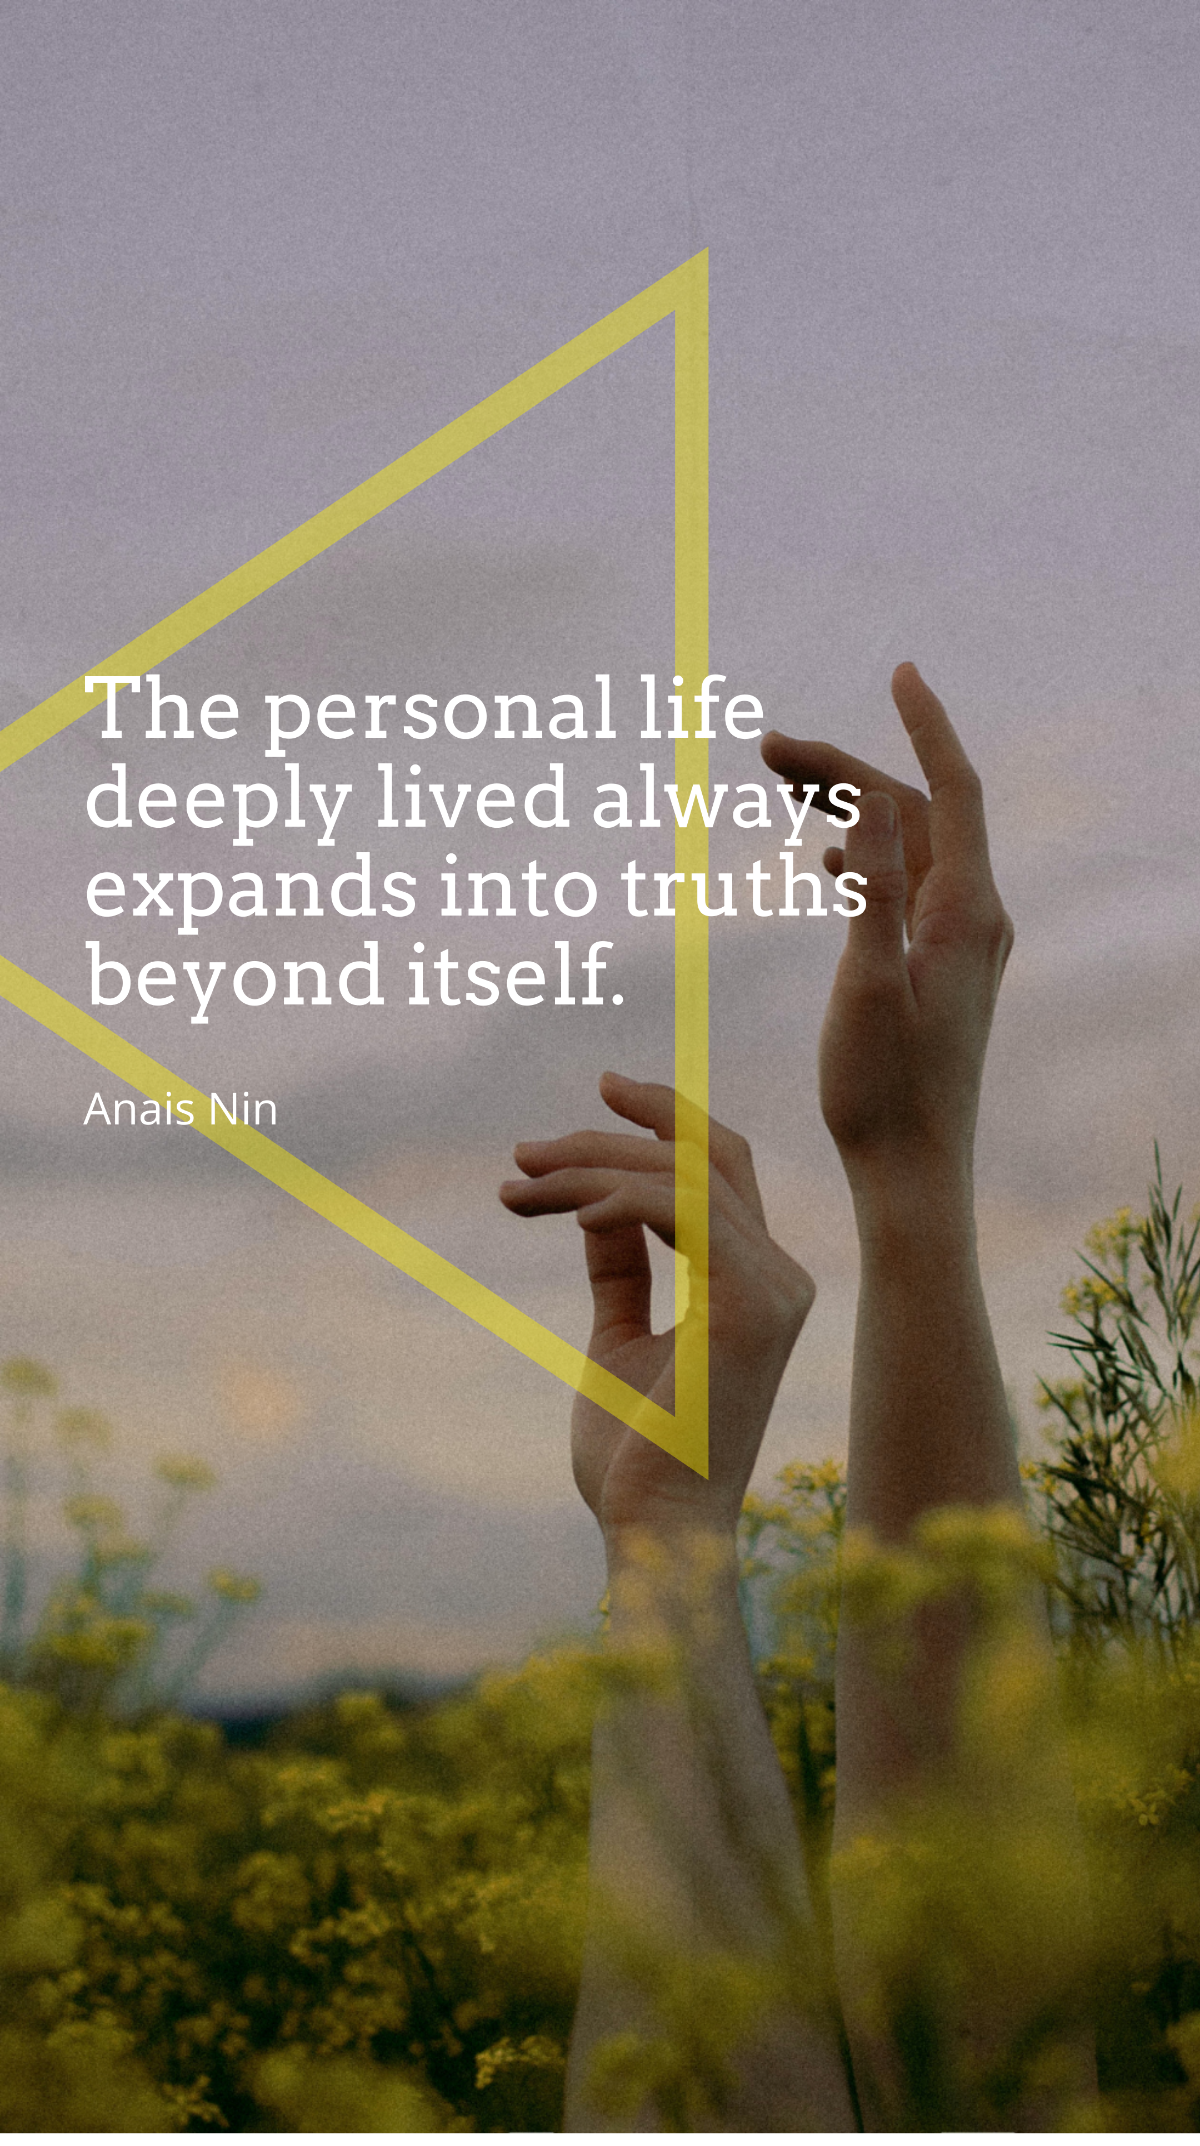 Anais Nin - The personal life deeply lived always expands into truths beyond itself. Template